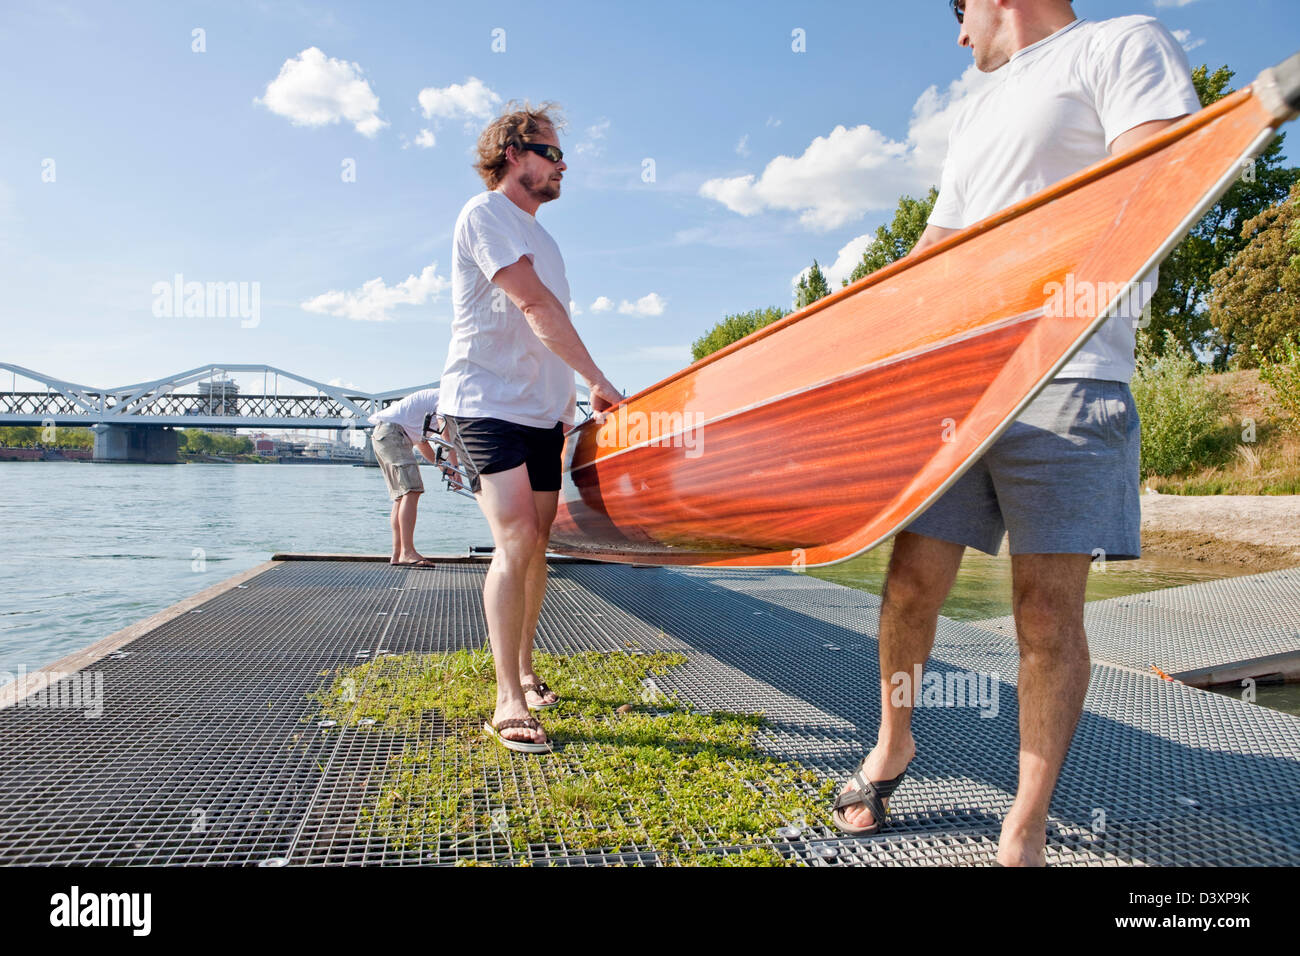 Teamwork Concept of Cooperation and Helping Hands in Rowing Sports Stock Photo